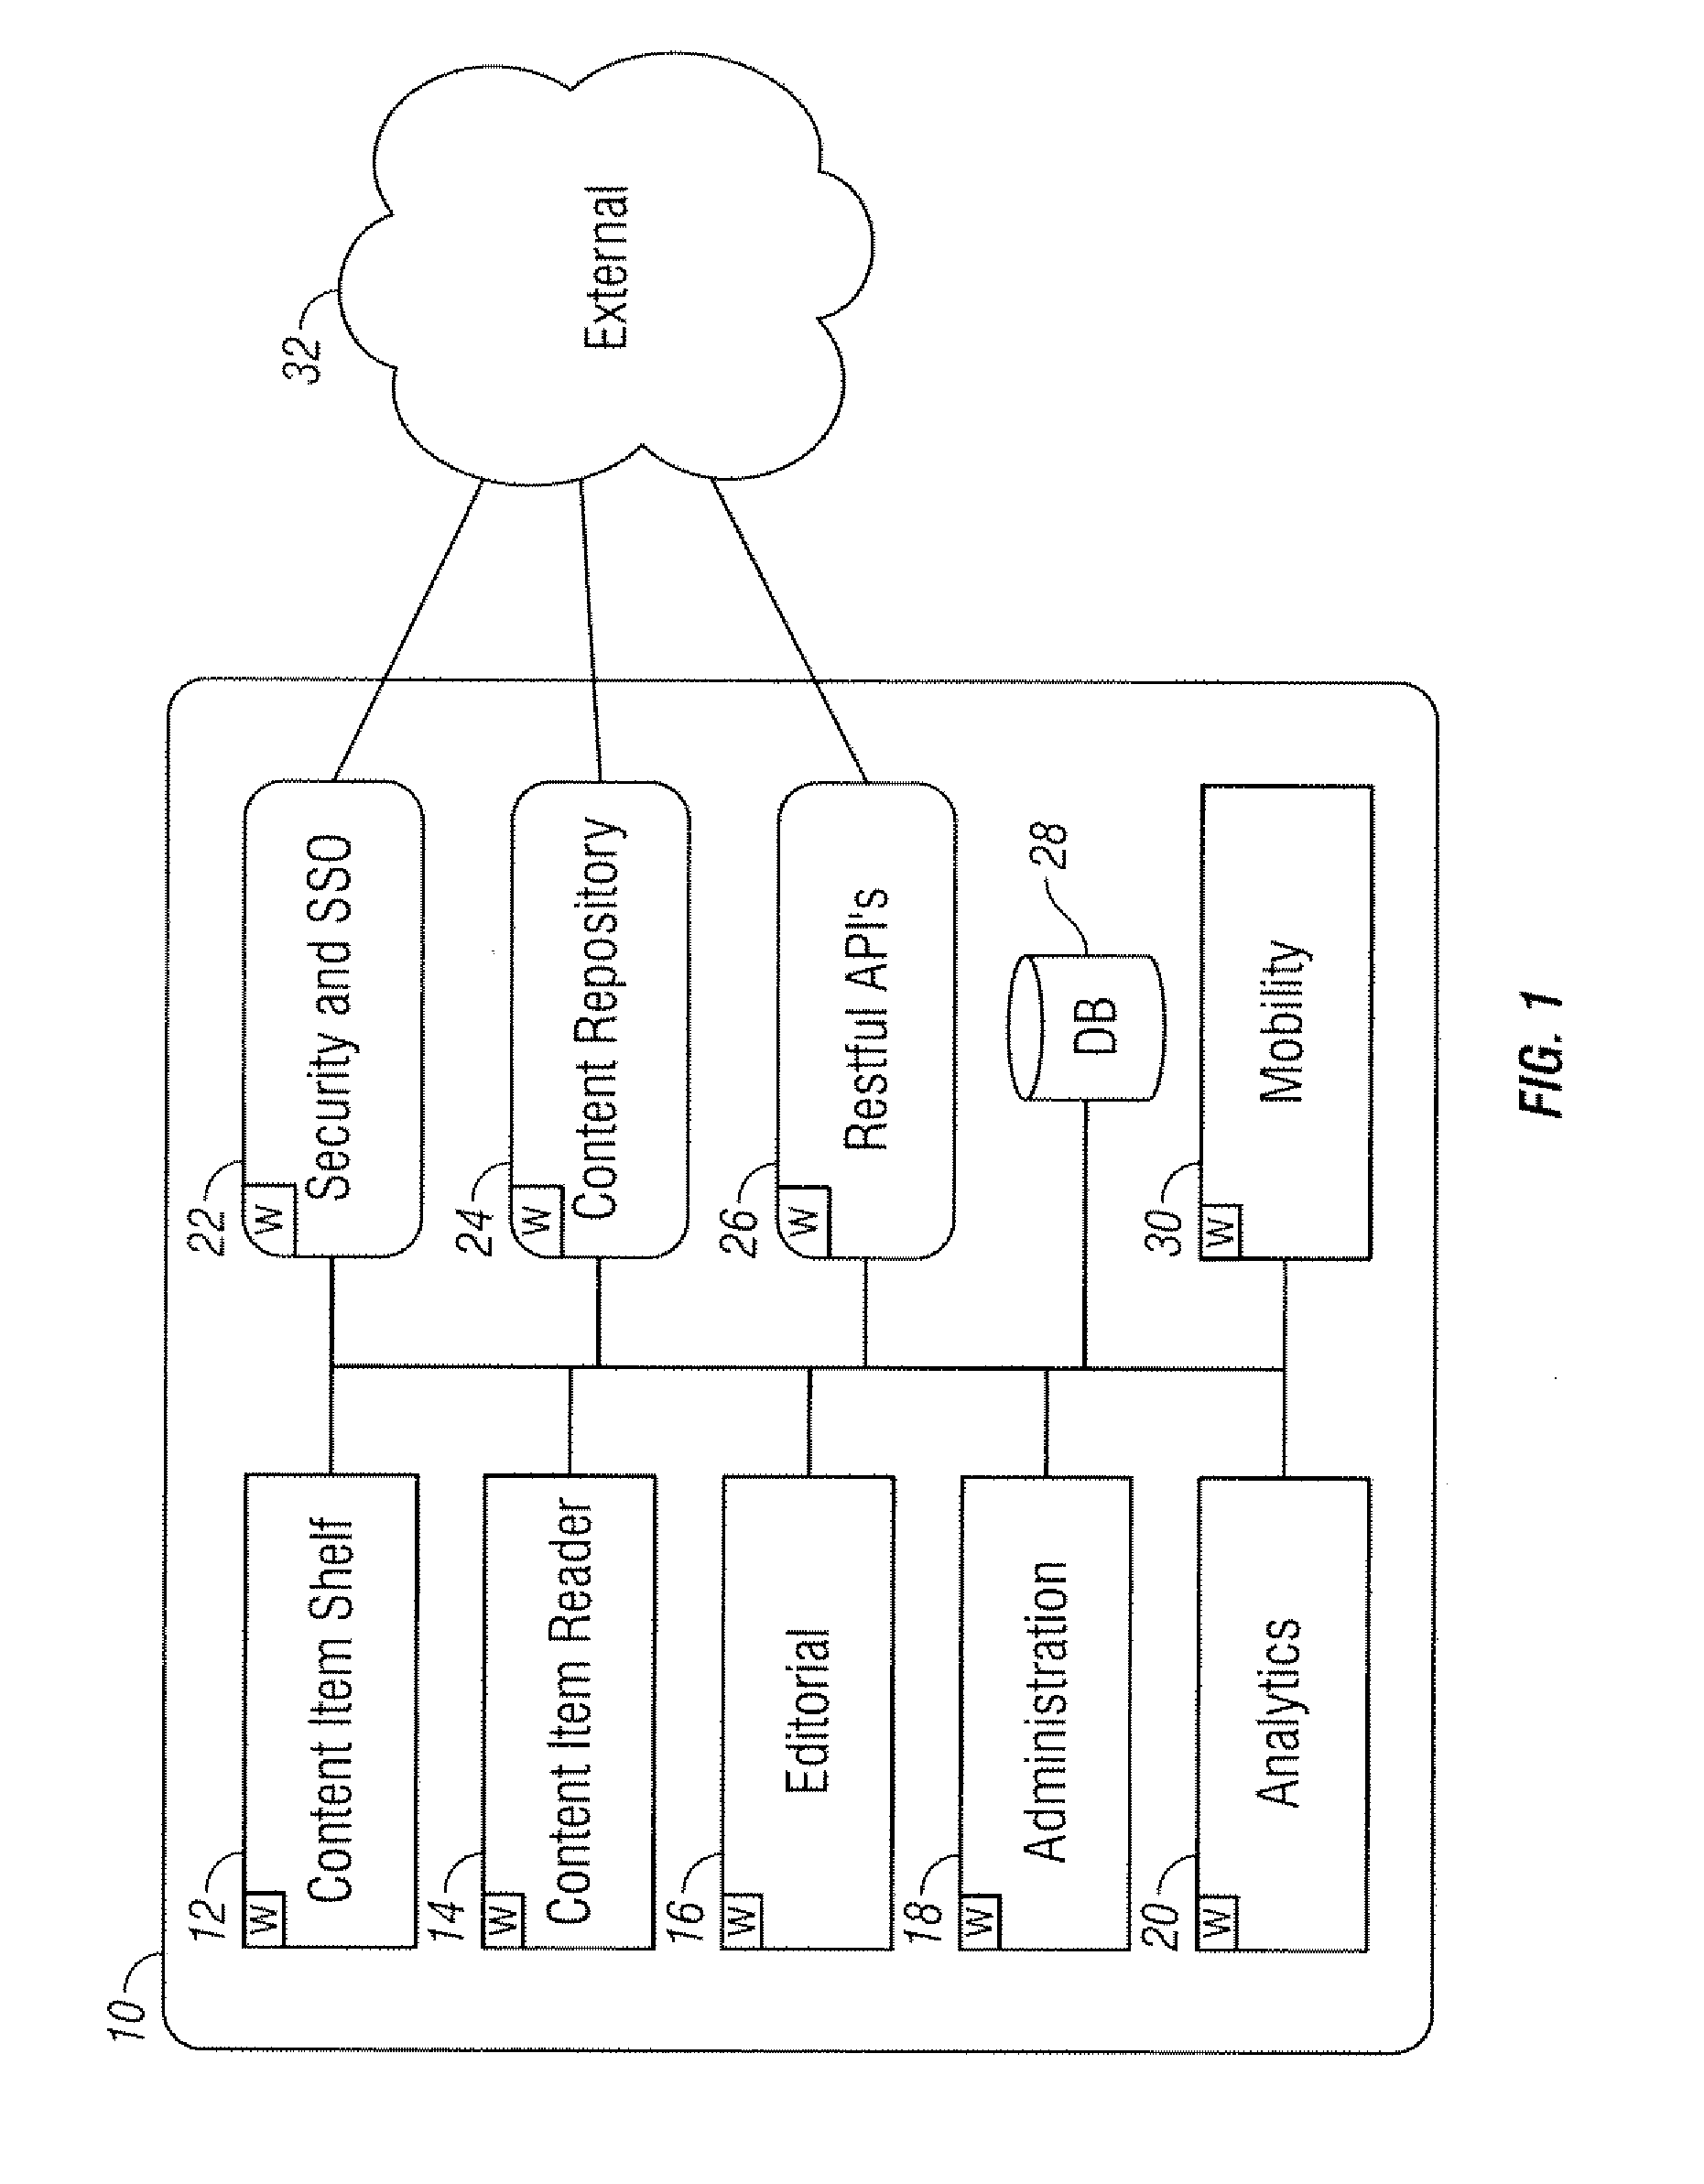 System and method for publishing and displaying digital materials